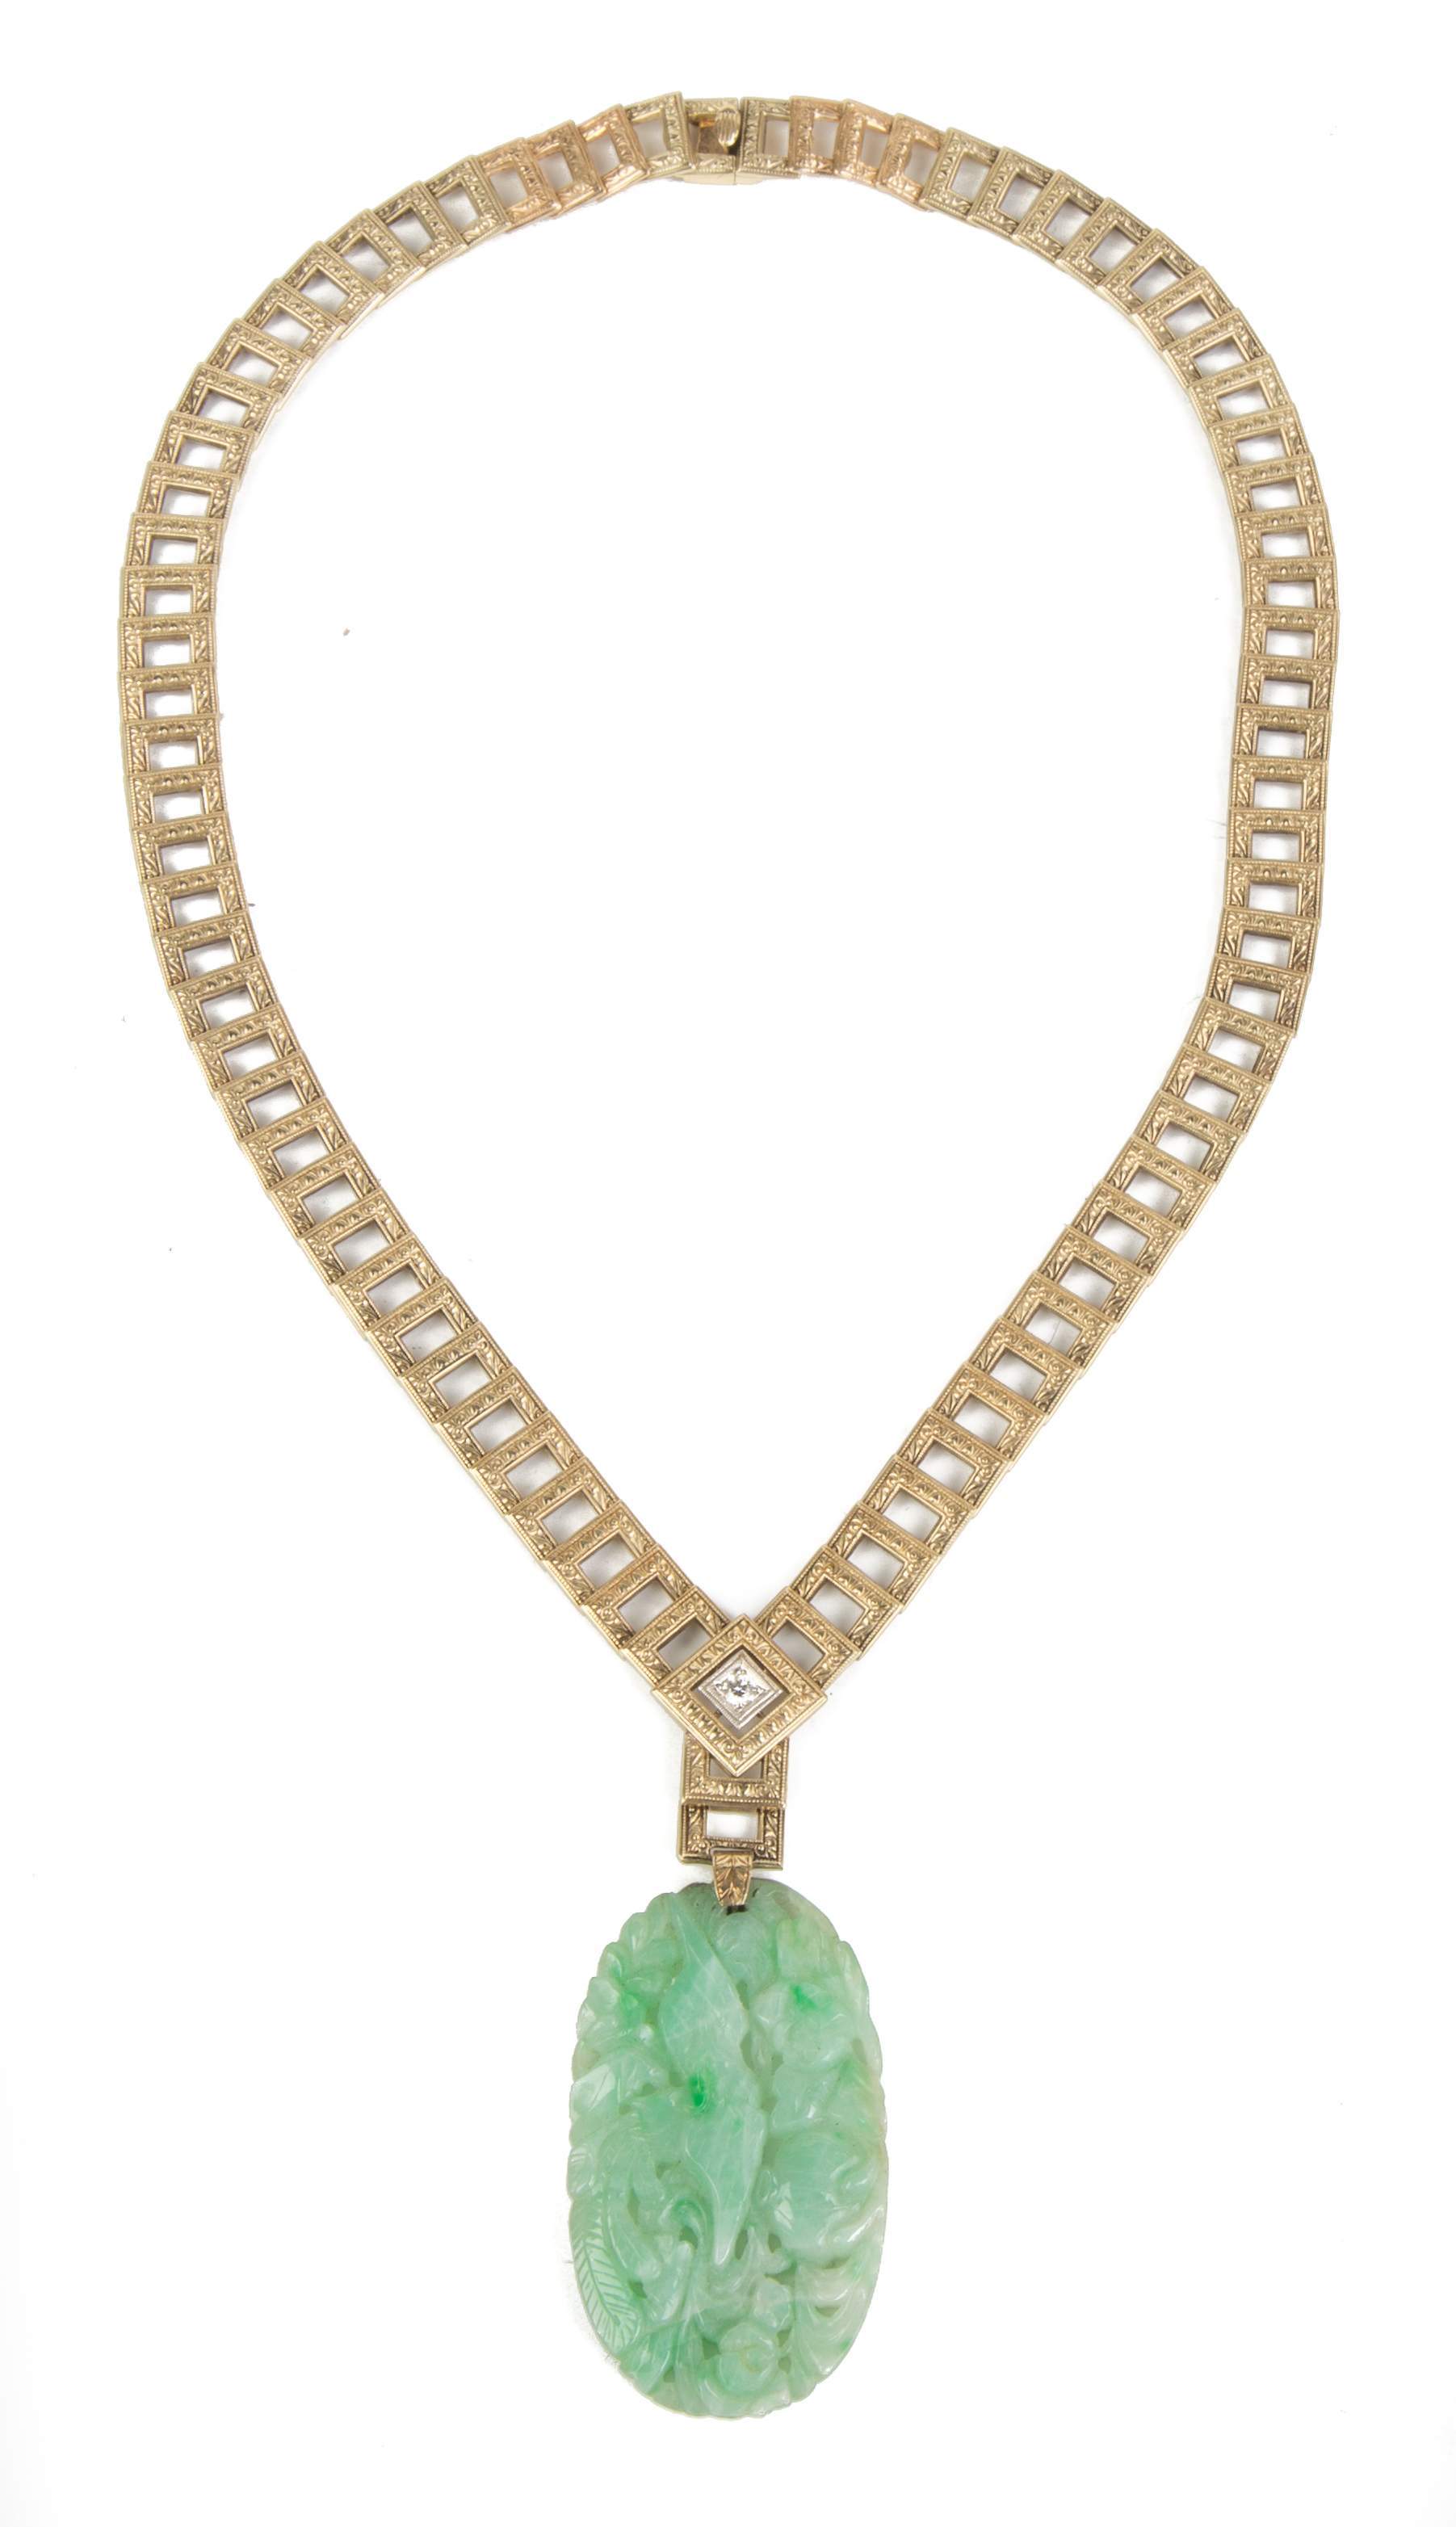 14k Gold Necklace With Carved Jade Pendant Cottone Auctions 